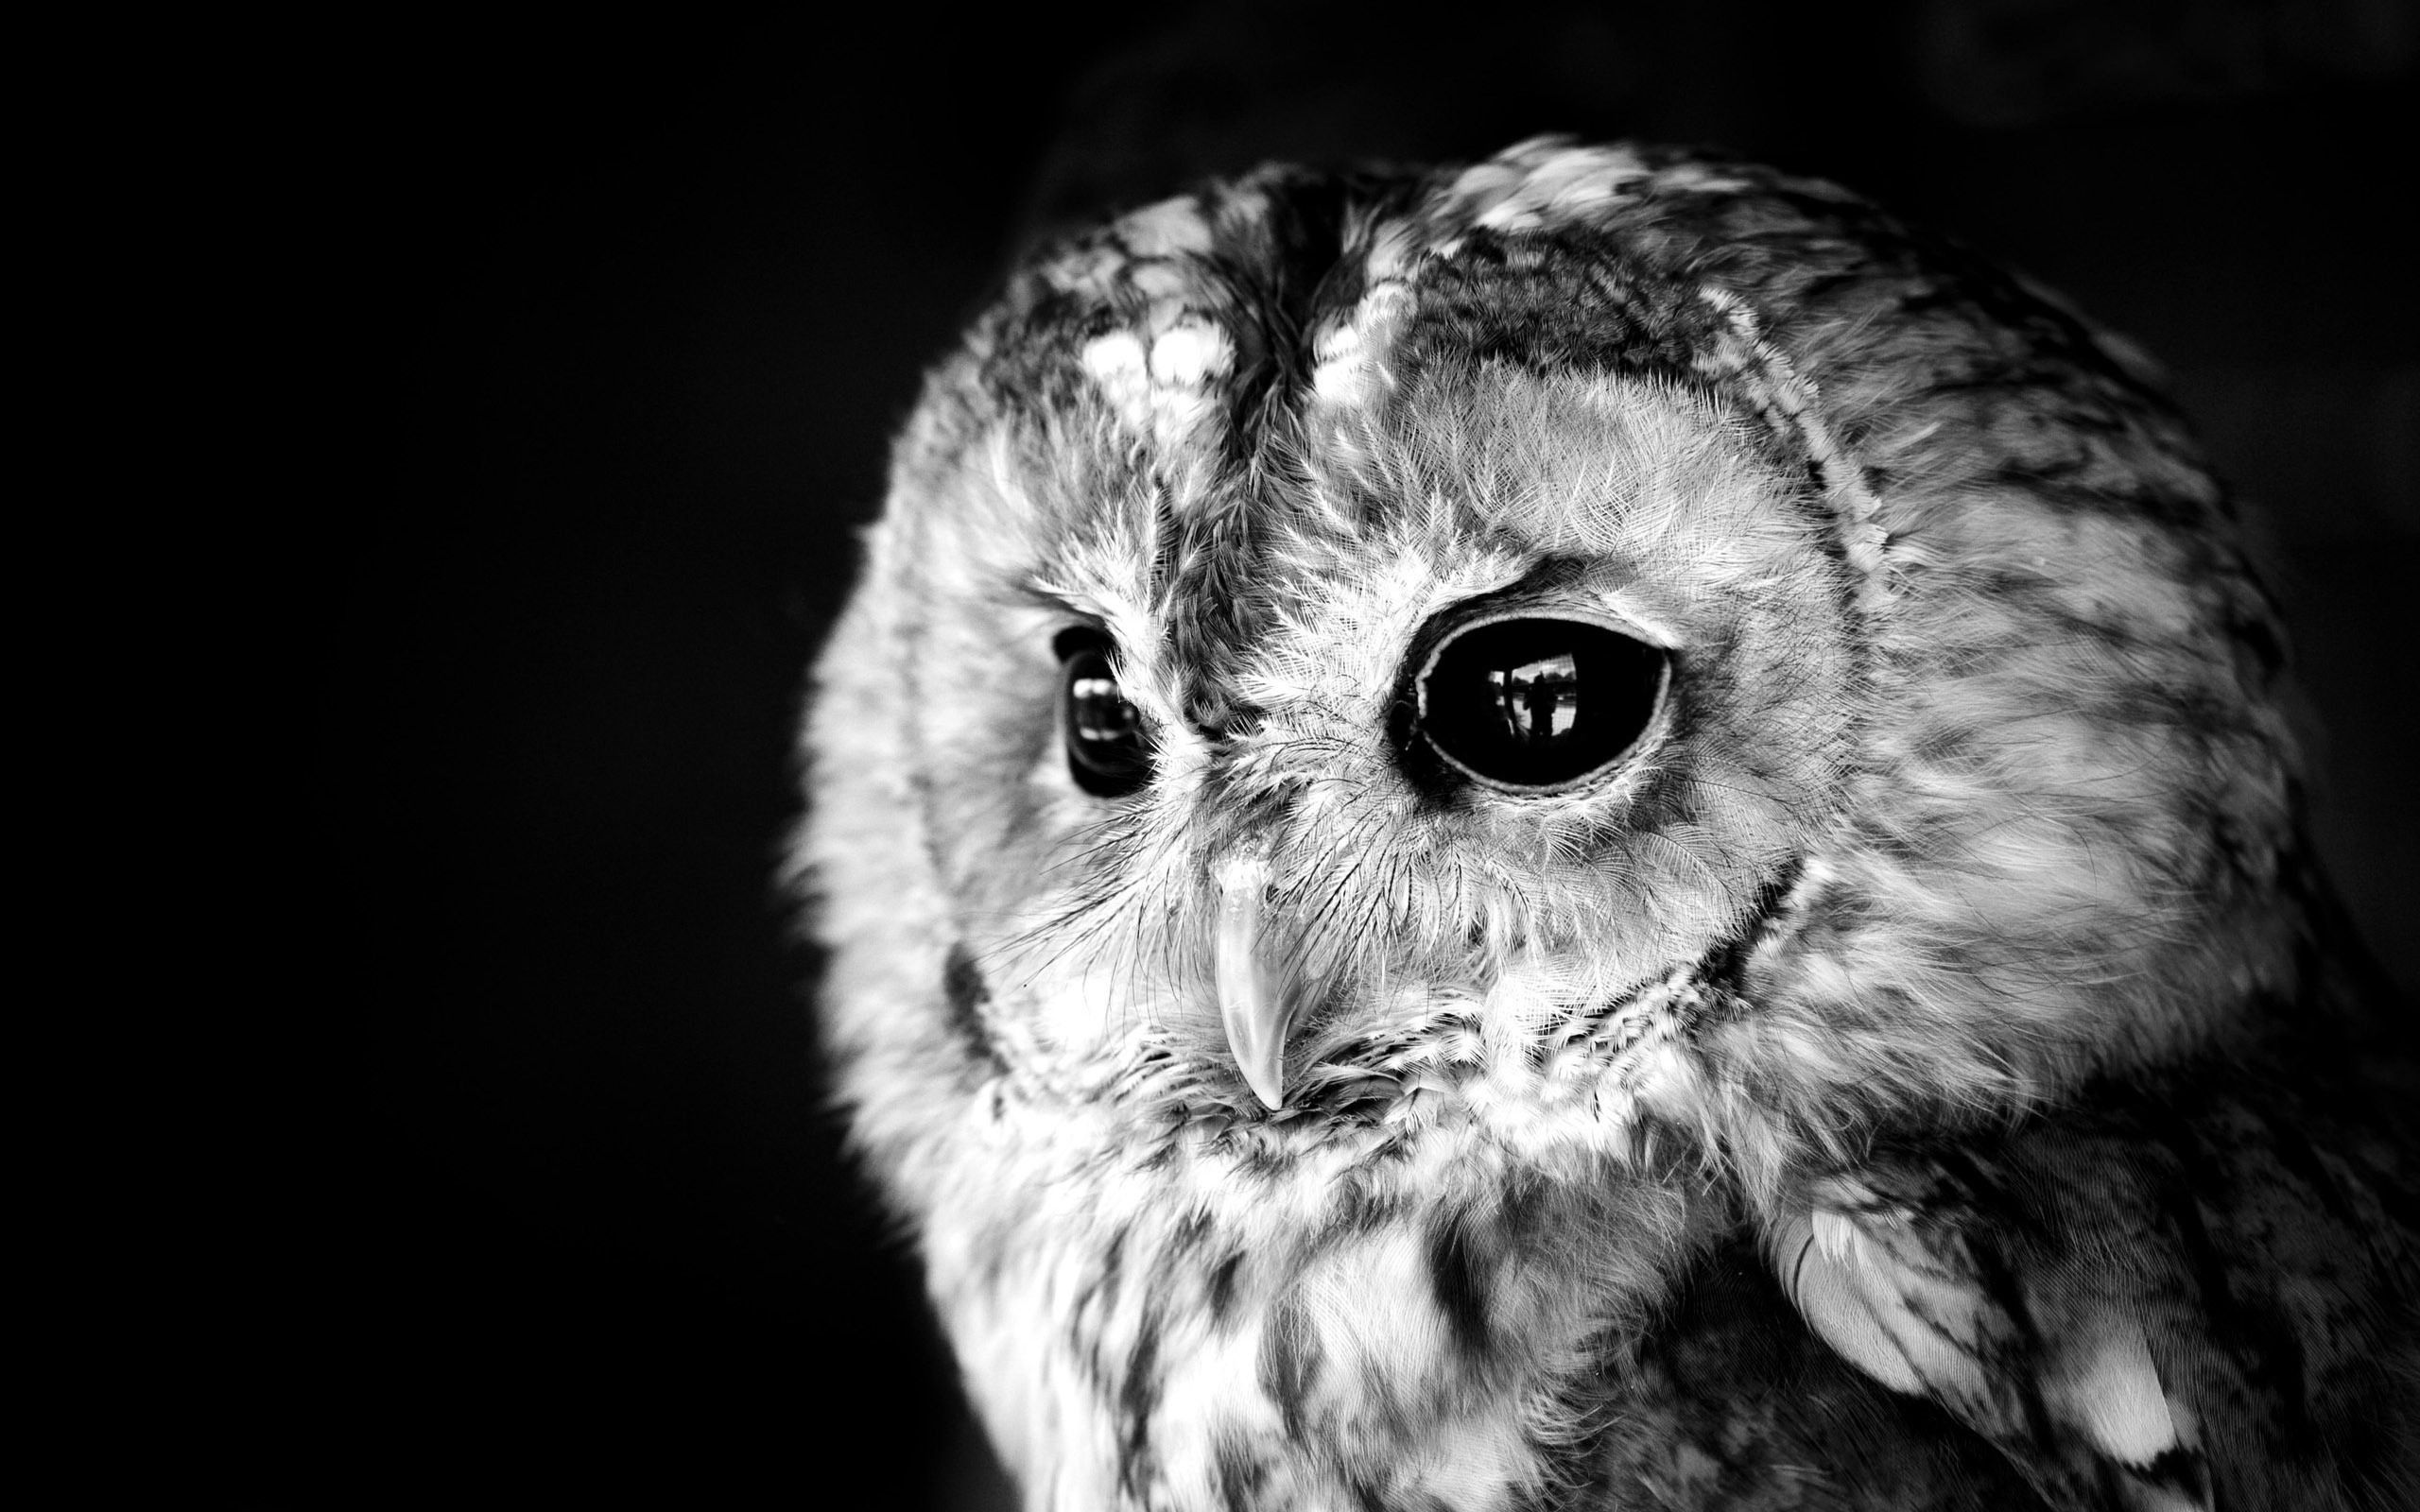 Black and White Owl Wallpapers - Top Free Black and White Owl